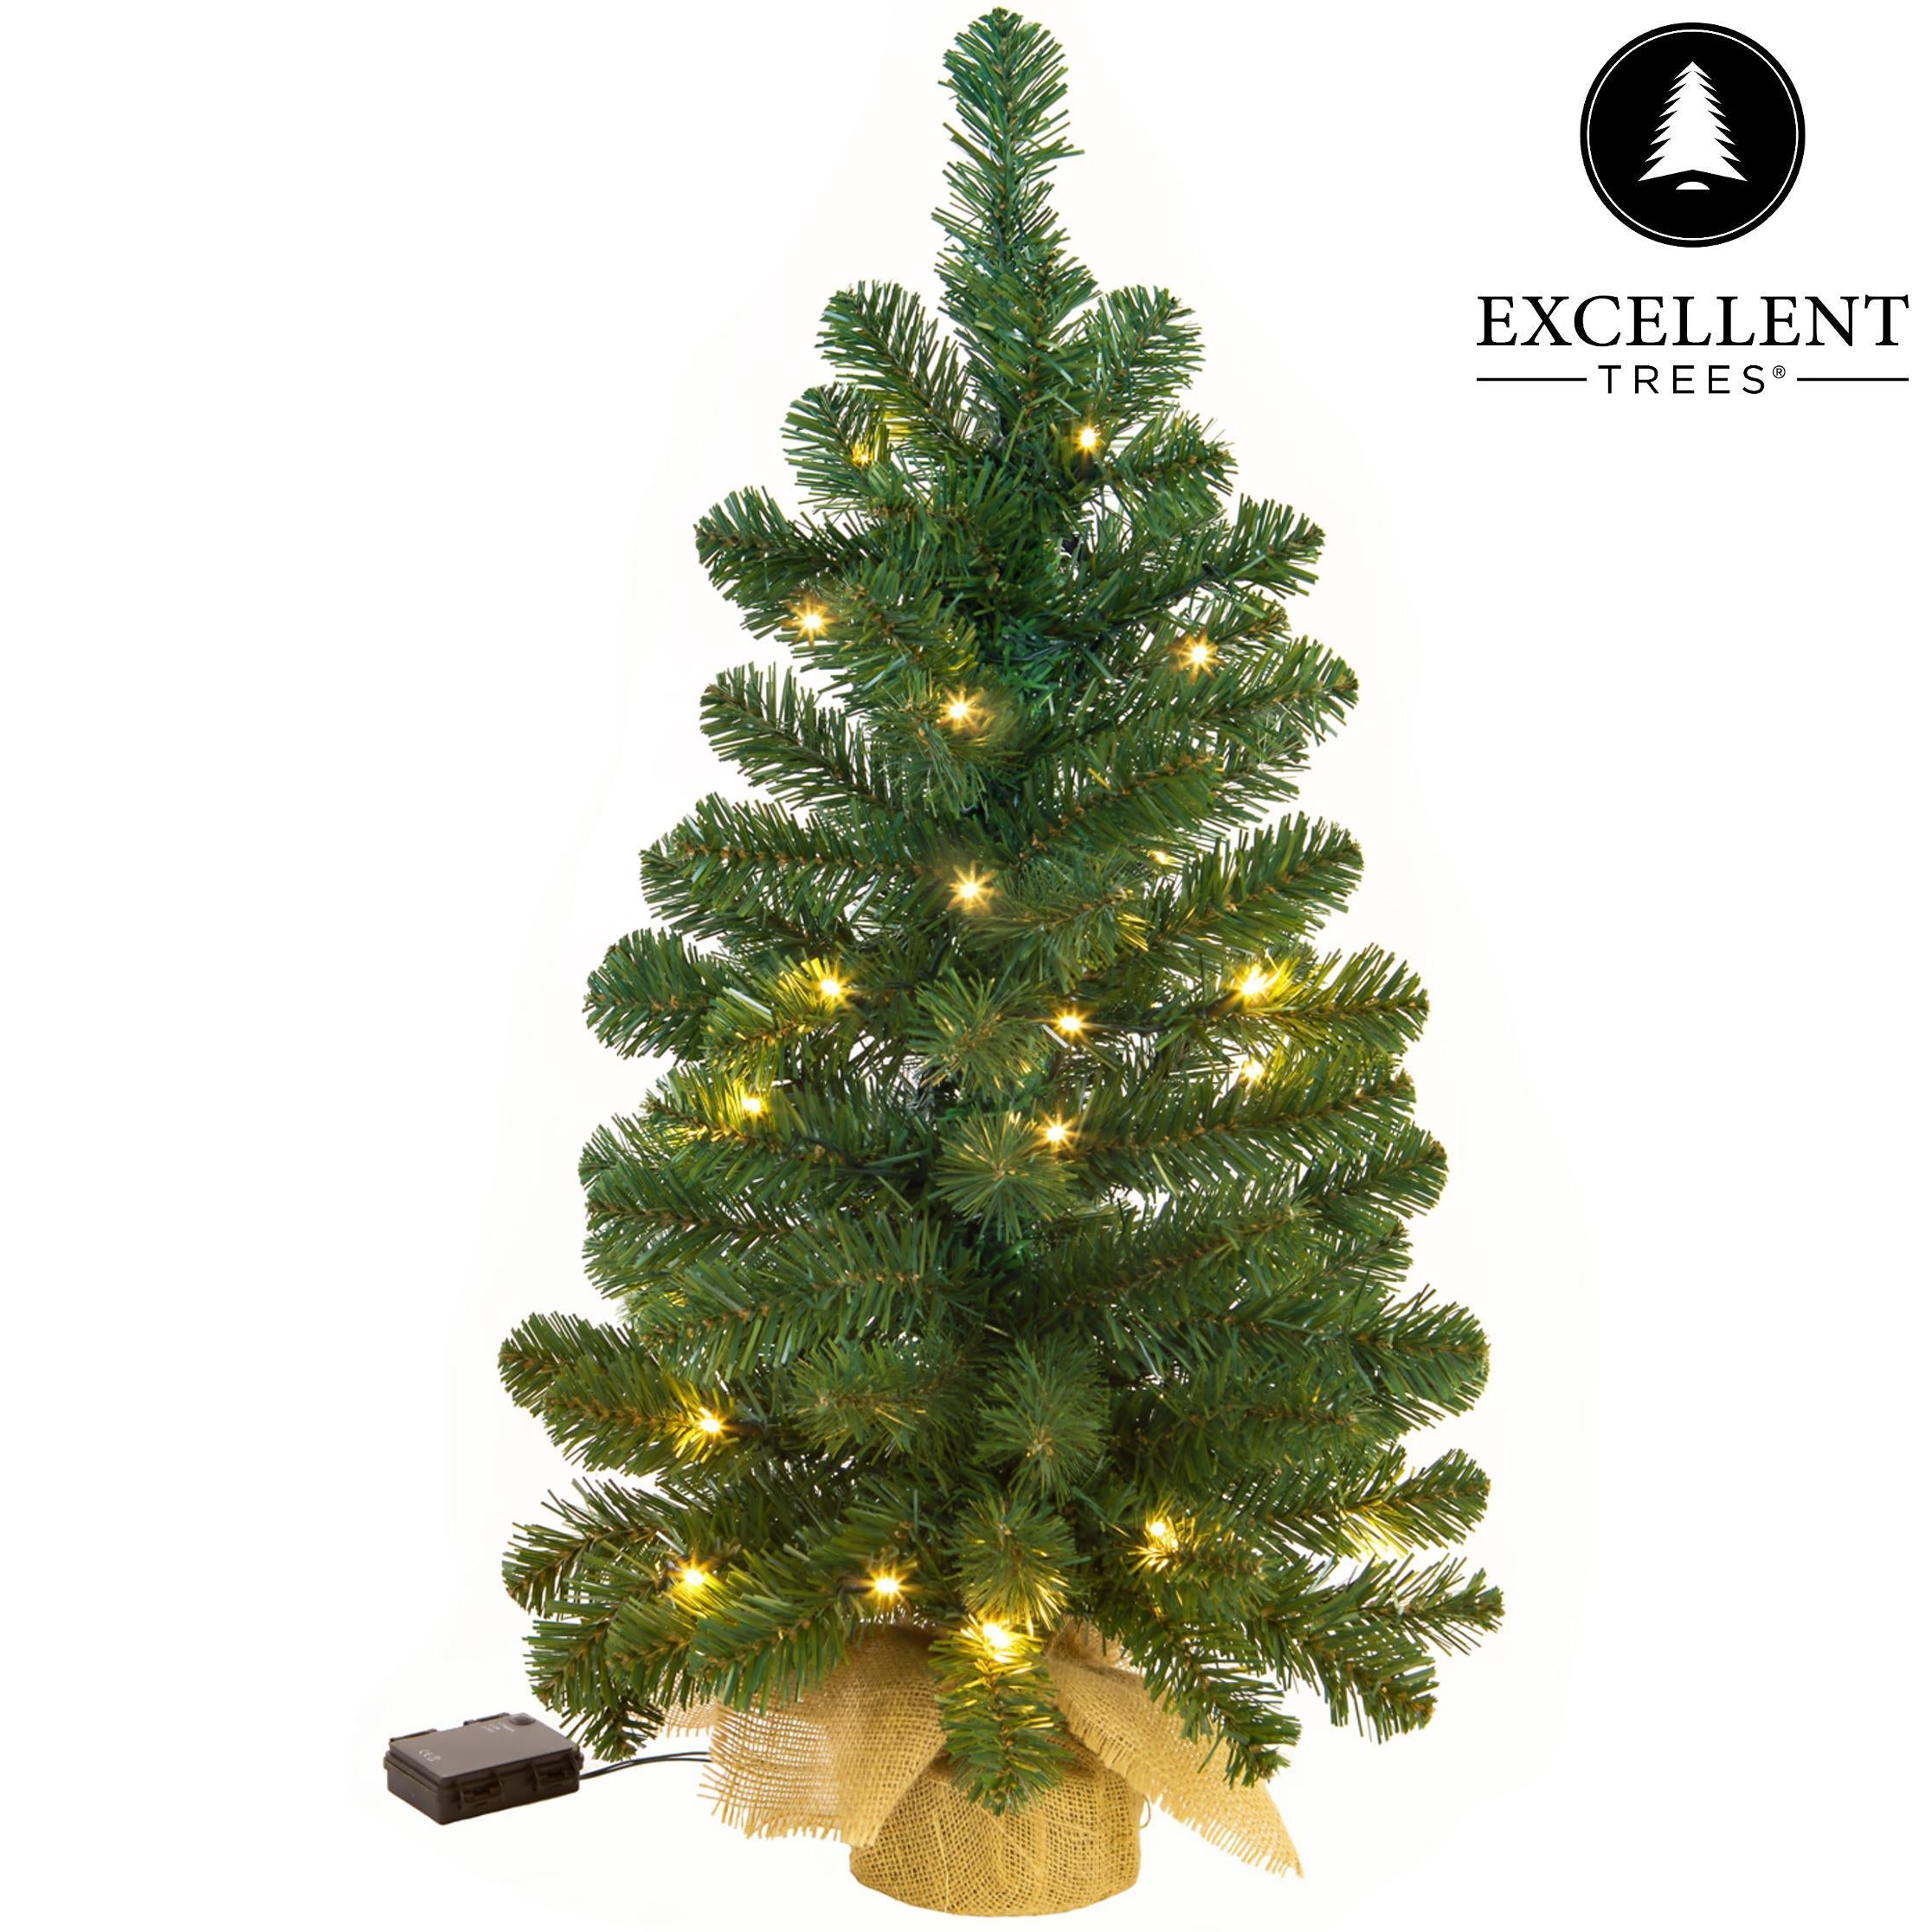 Christmas tree Excellent Trees® LED Jarbo Green 90 cm with lighting - Luxury version - 80 Lights